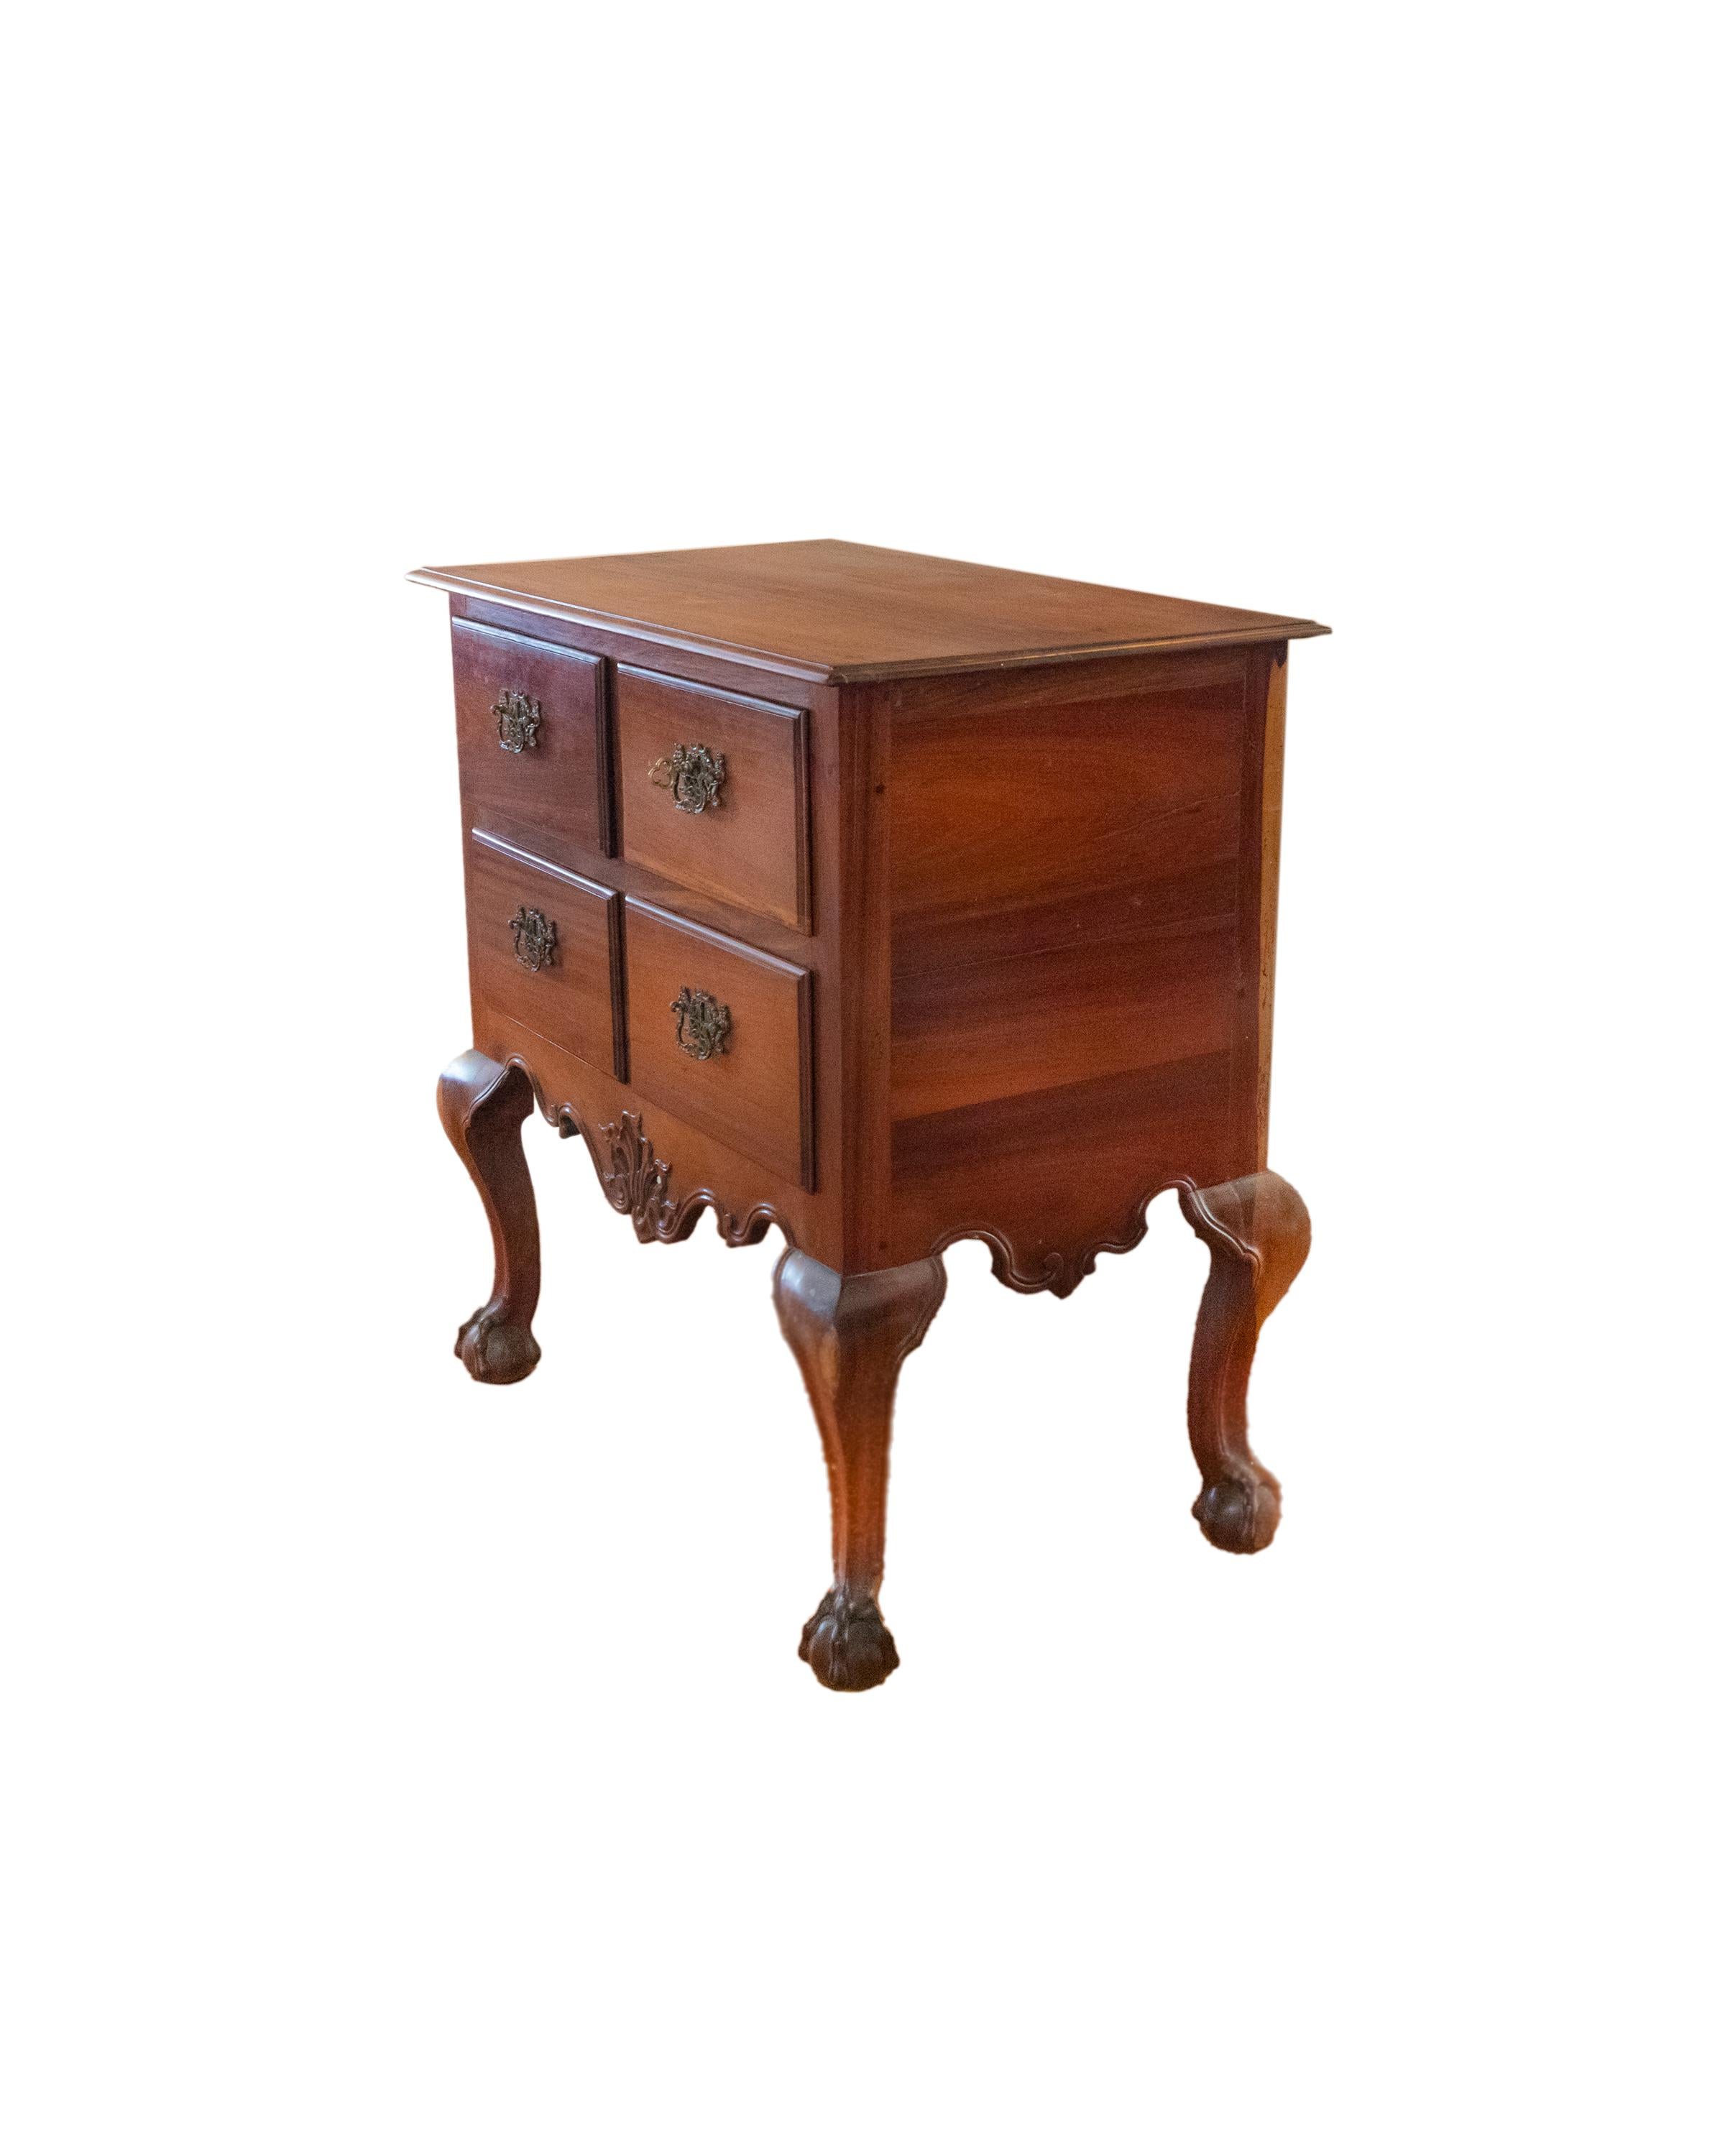 This rare 19th century chest of drawers features a cabriolet skirt and legs, three drawers, and period-appropriate drawing board and metal hardware. It showcases an English-influenced style that was popular during the reign of Maria the I of